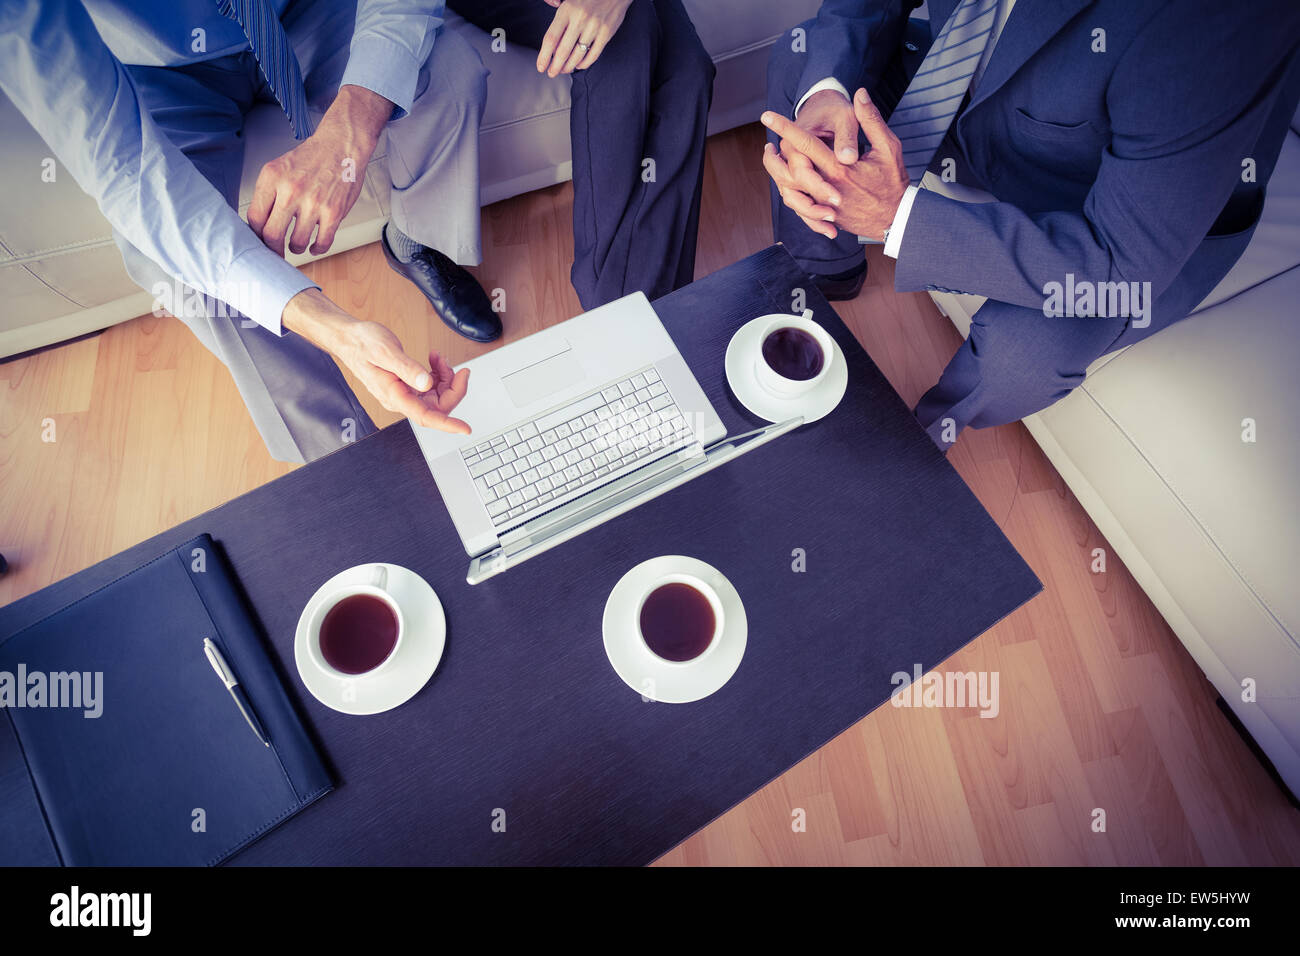 Business people having a meeting Stock Photo